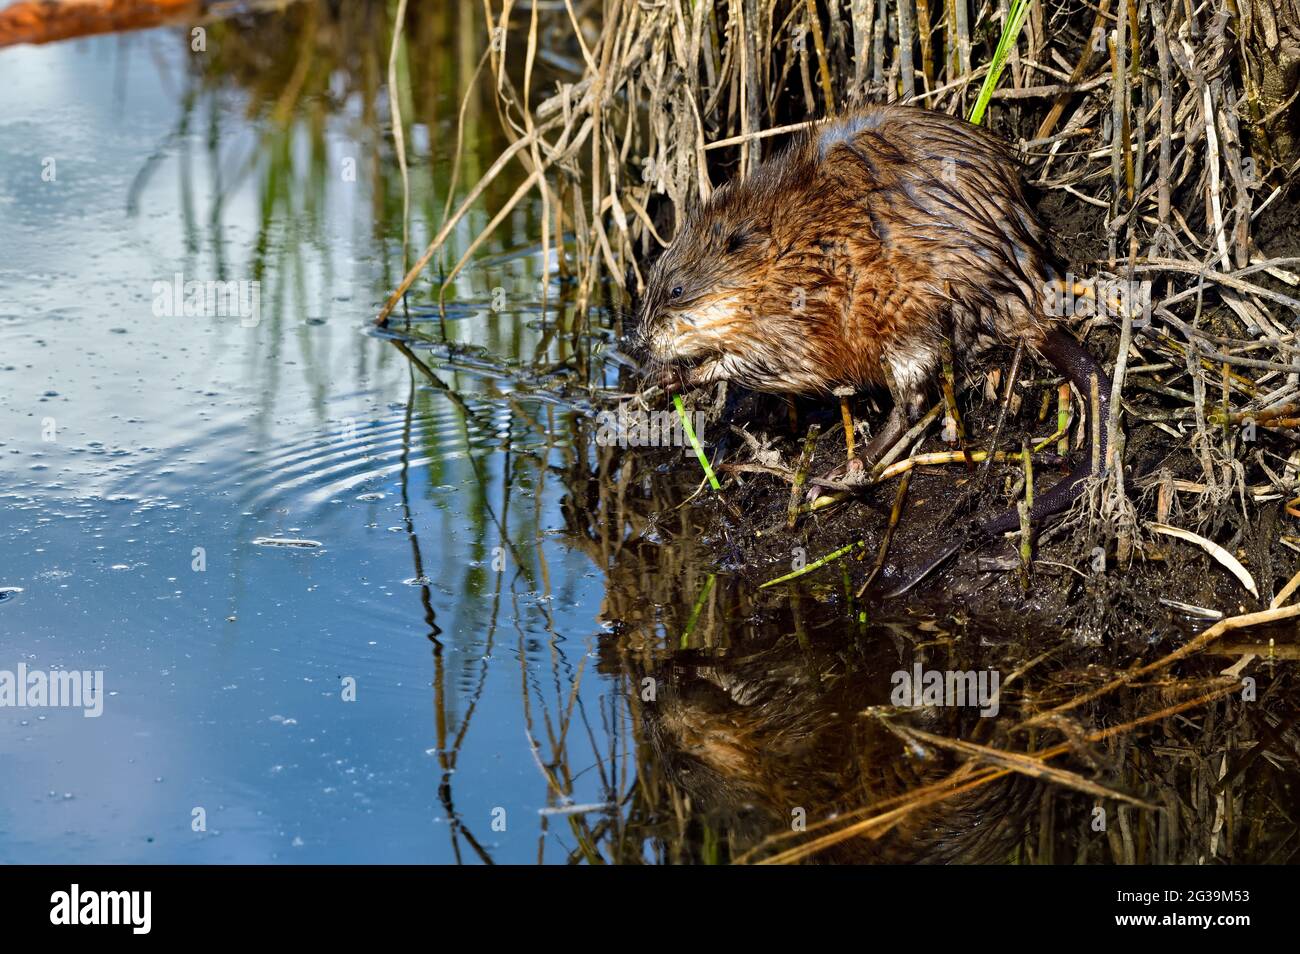 A side view of a wild muskrat  'Ondatra zibethicus', feeding on some green vegetation along the edge of a pond in rural Alberta Canada. Stock Photo